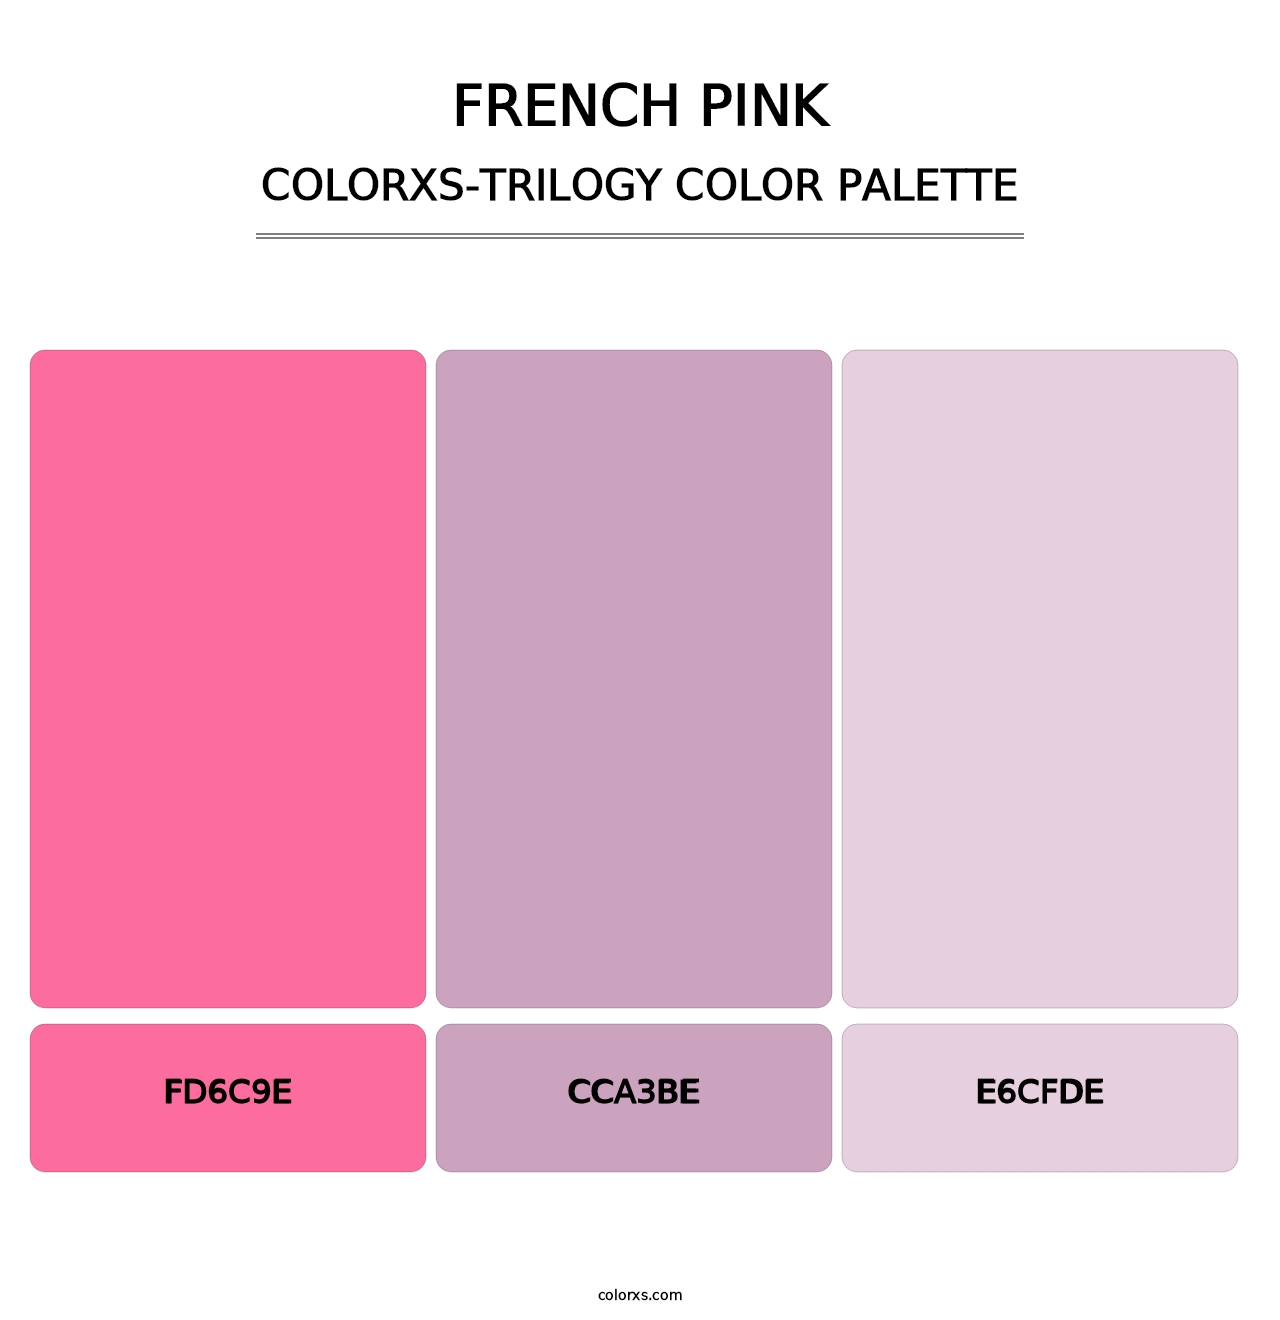 French Pink - Colorxs Trilogy Palette